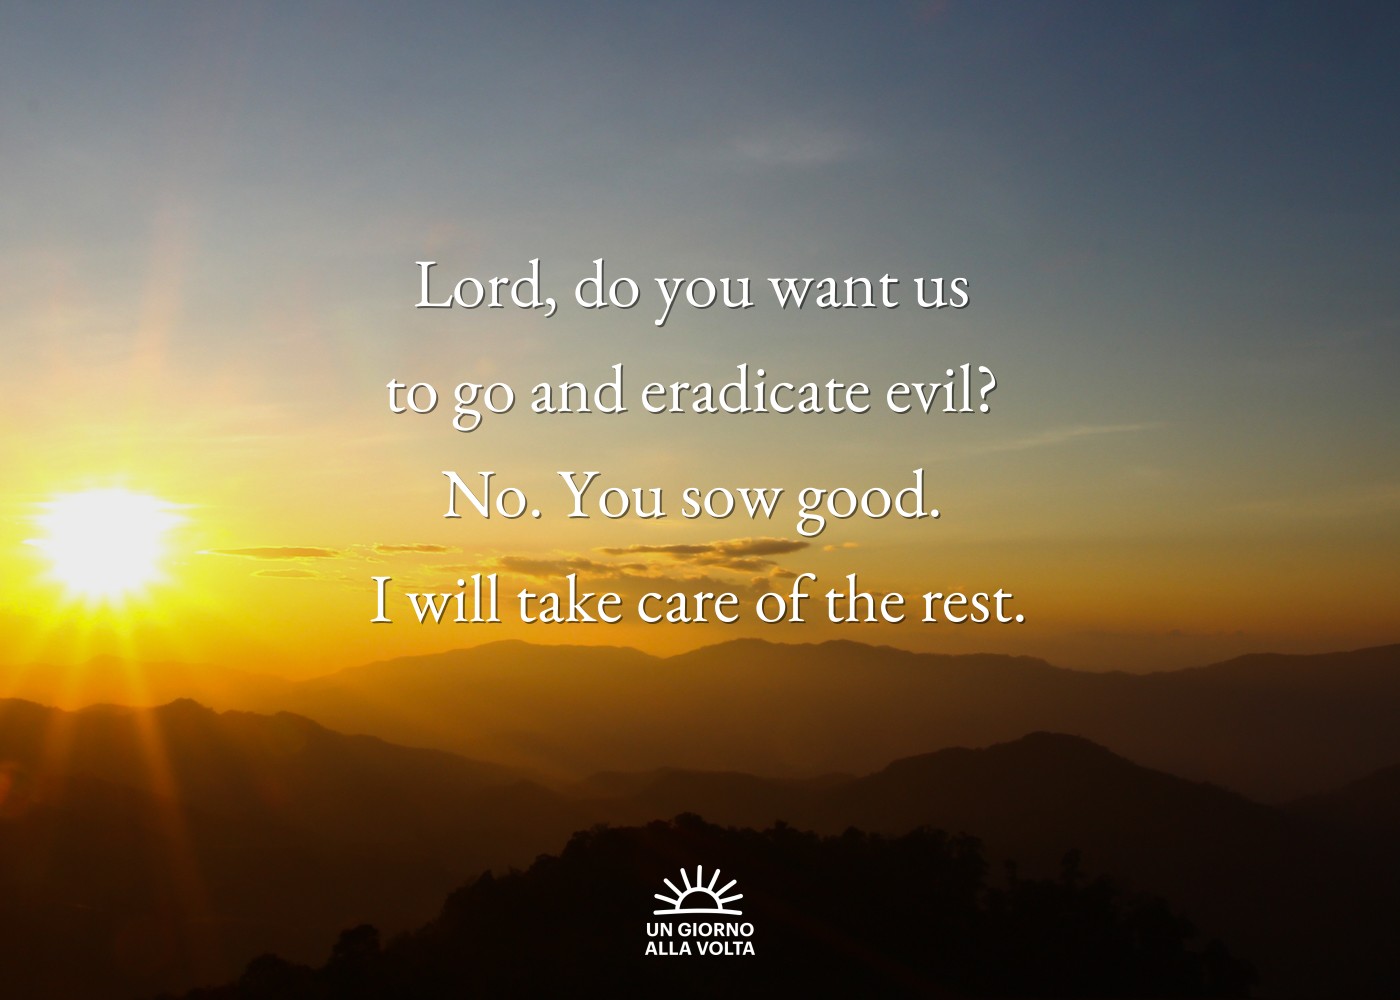 Lord, do you want us 
to go and eradicate evil? 
No. You sow good. 
I will take care of the rest.
